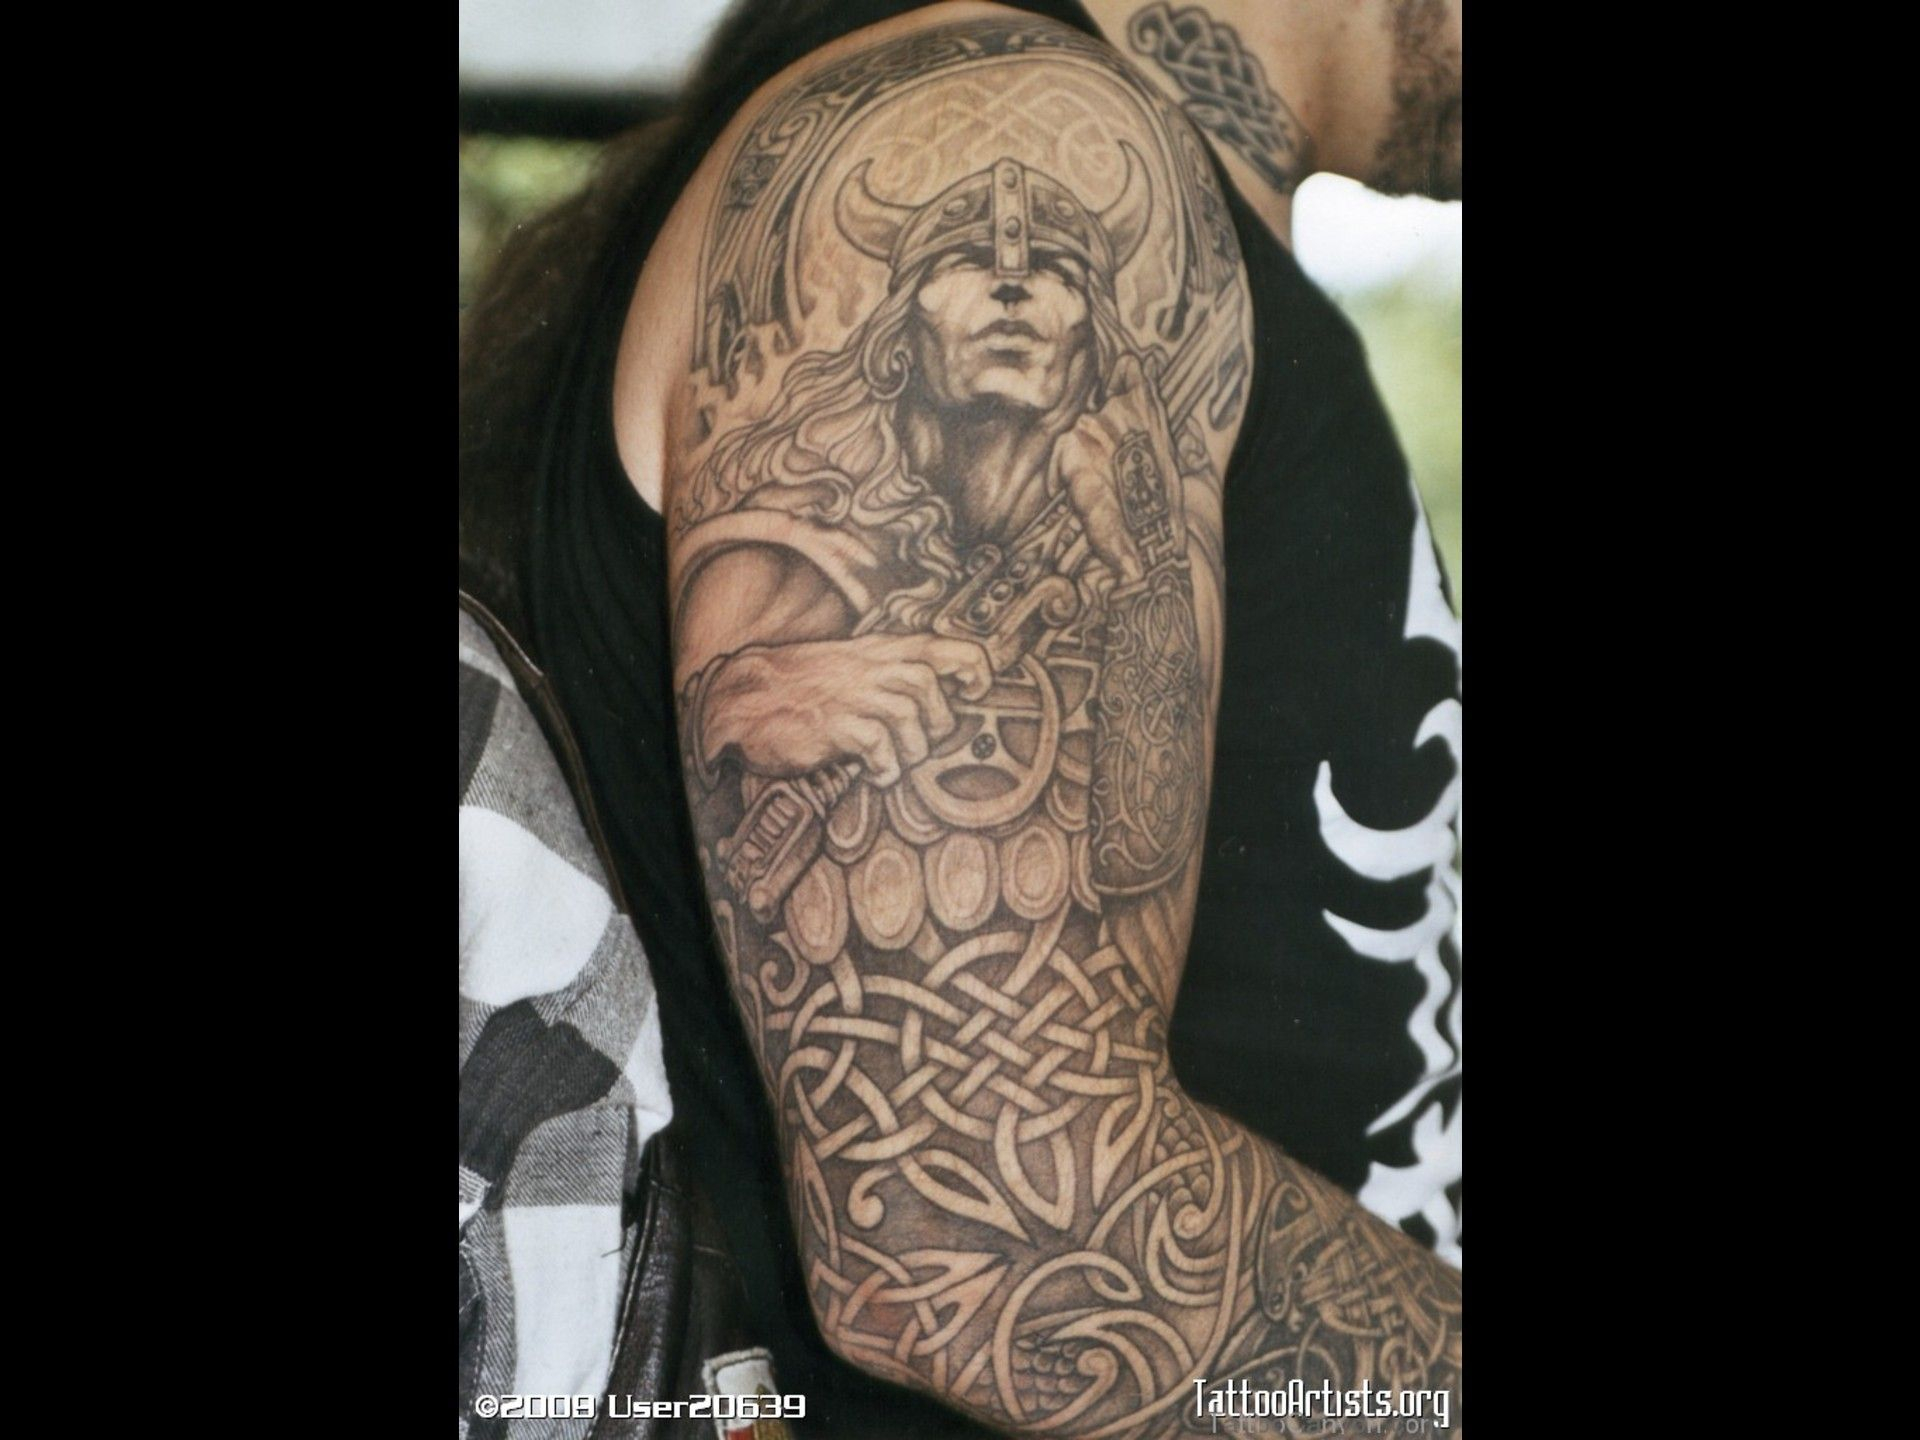 19466 Celtic Warrior Tattoo Artists Org Free Download 13606 Tattoo intended for dimensions 1920 X 1440